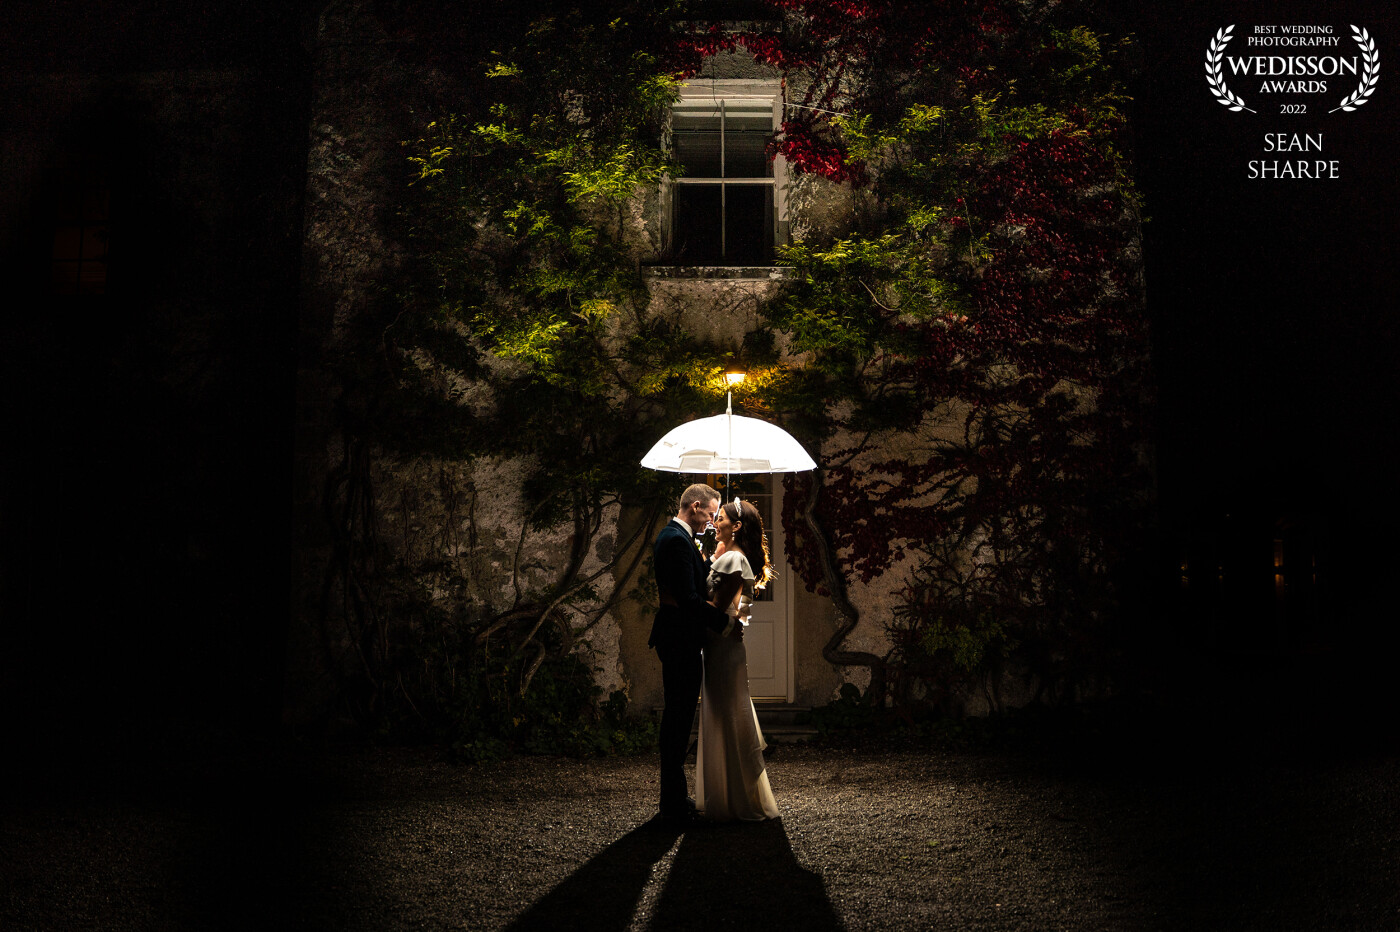 Lisa and Stephen at the beautiful Cloughjordan House, Co. Tipperary. Image taken with a flash behind the couple and using the umbrella to illuminate them. An absolutely gorgeous wedding day from start to finish.